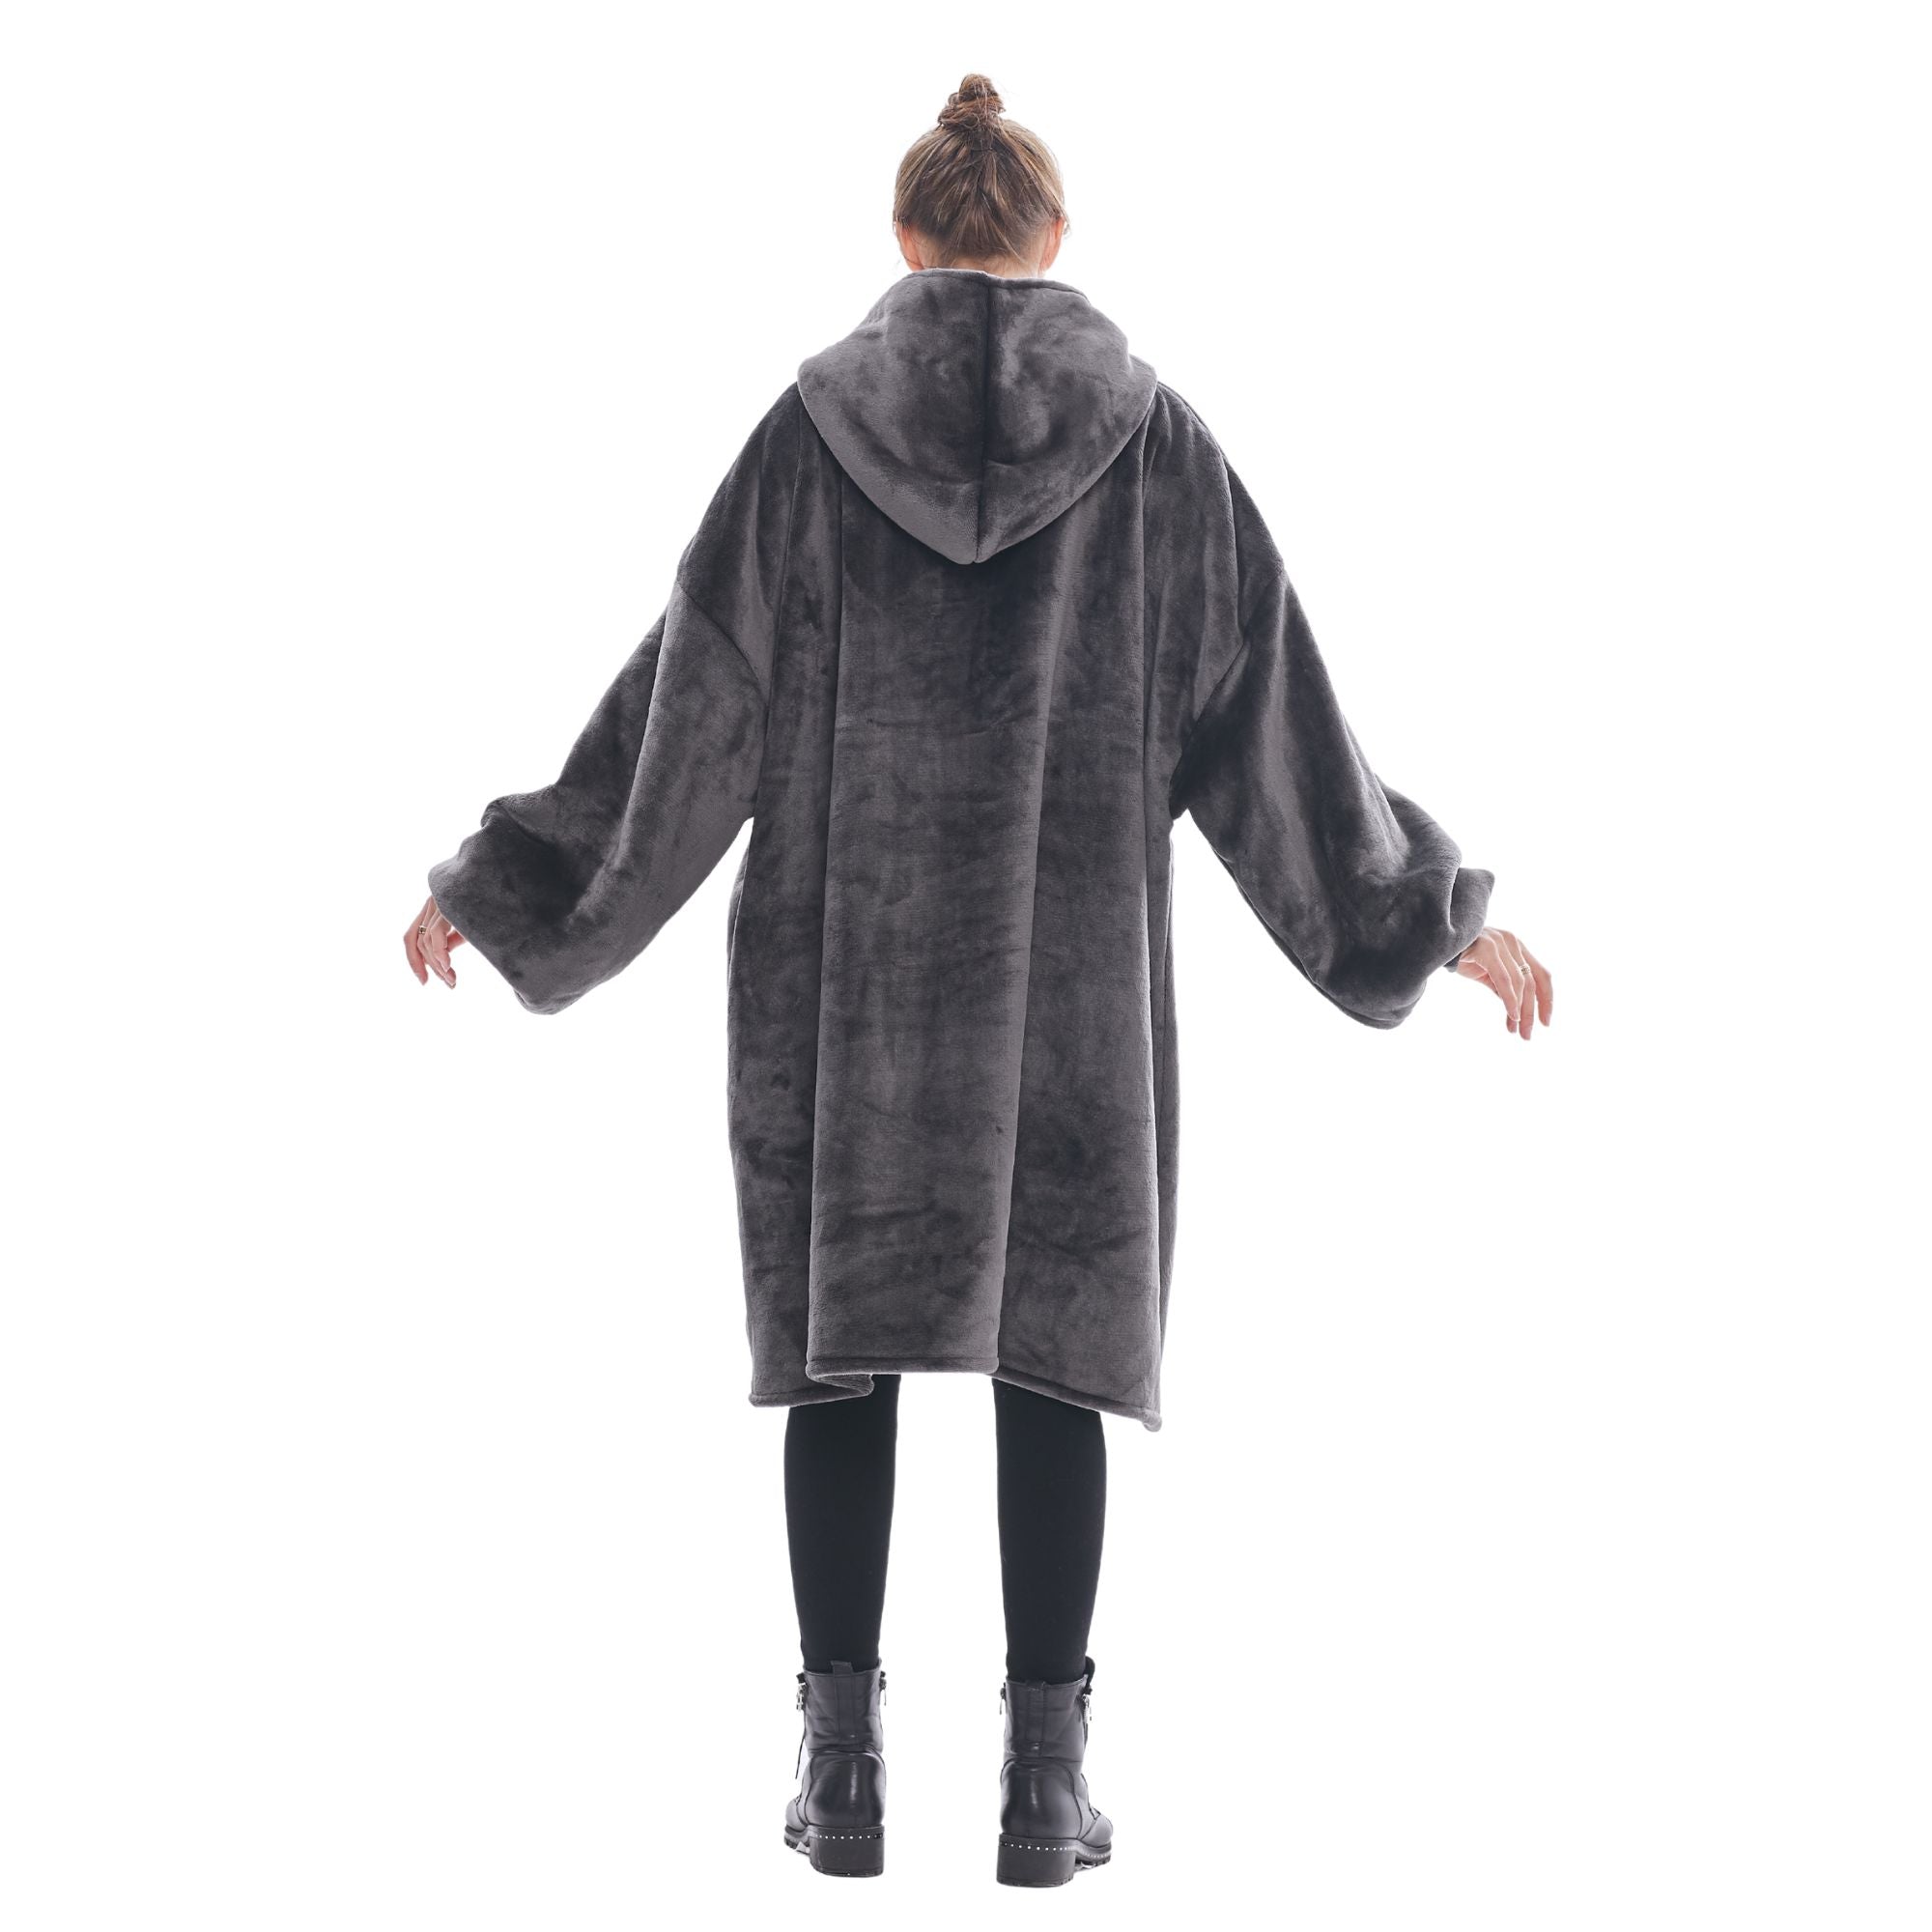 The Oversized Hoodie® grey woman soft cosy comfy sweet 